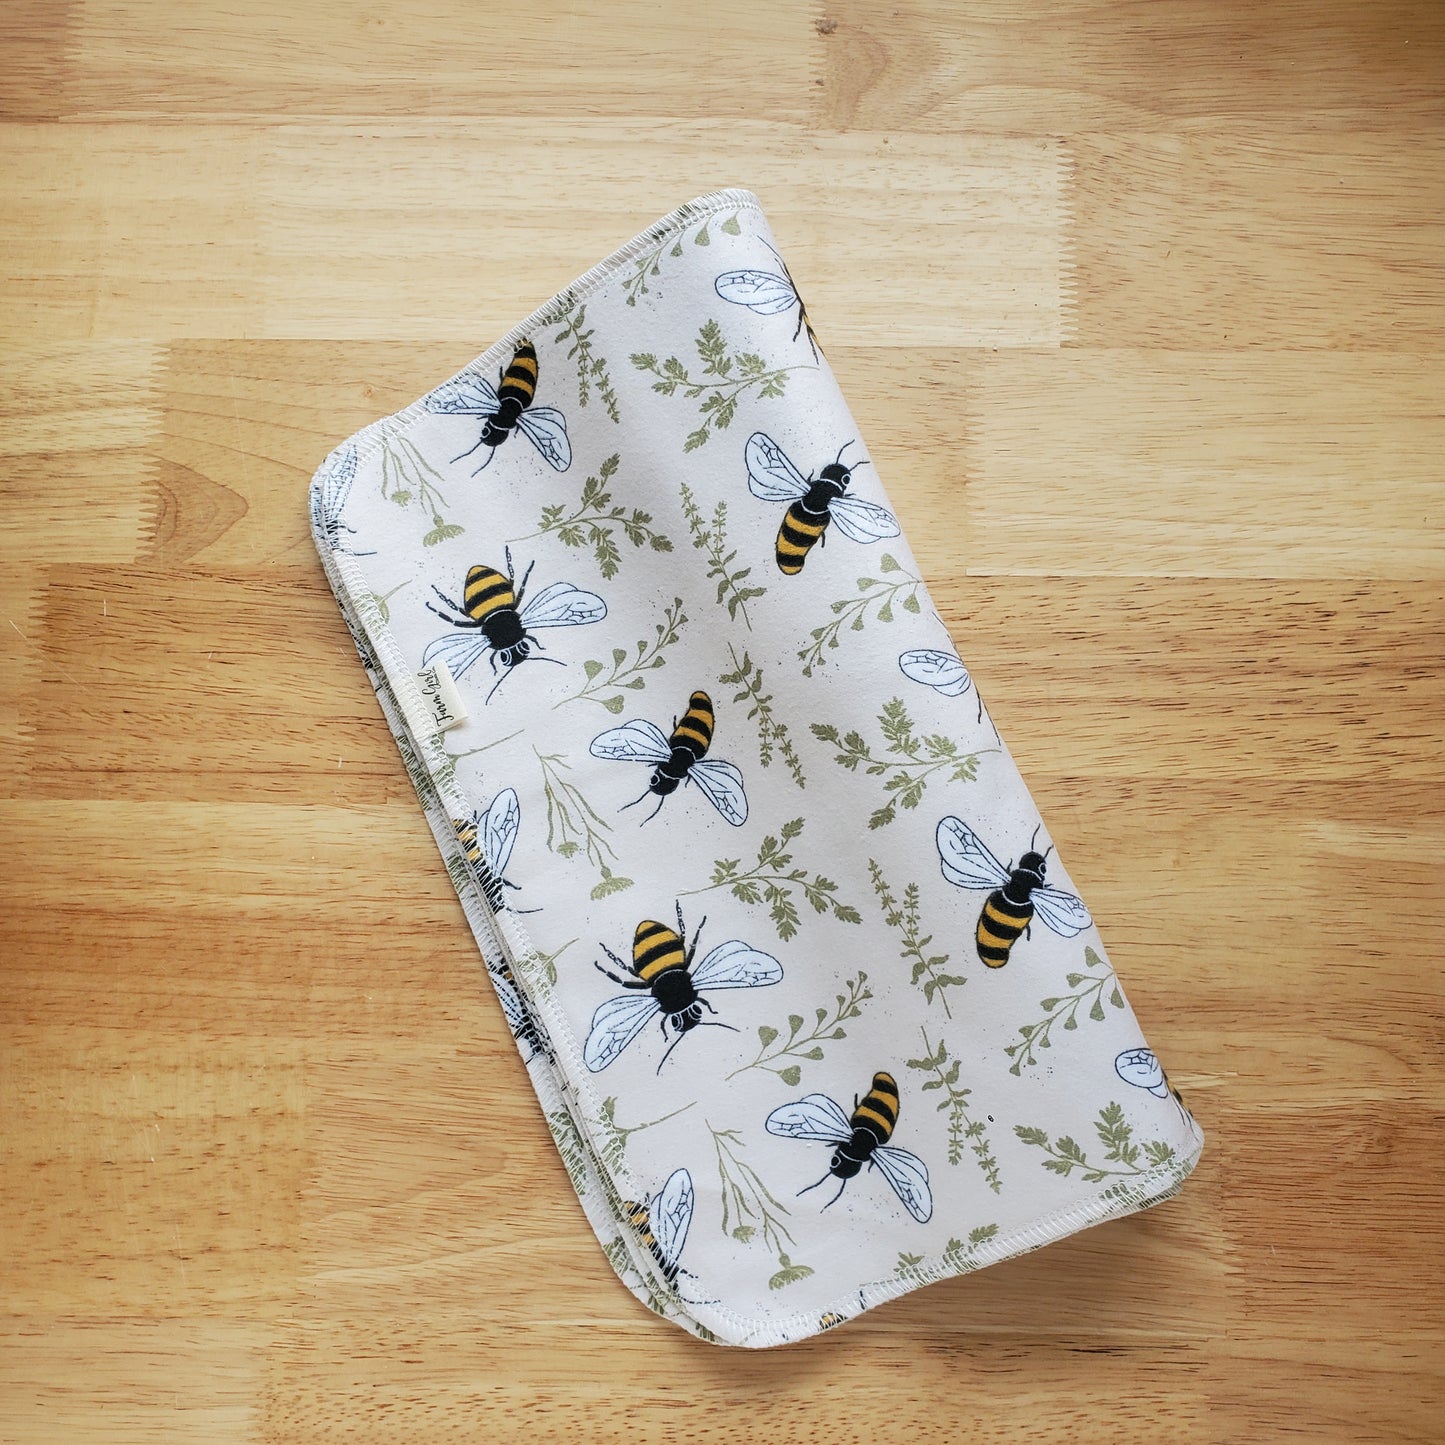 Paperless Towels | Bees and Plants